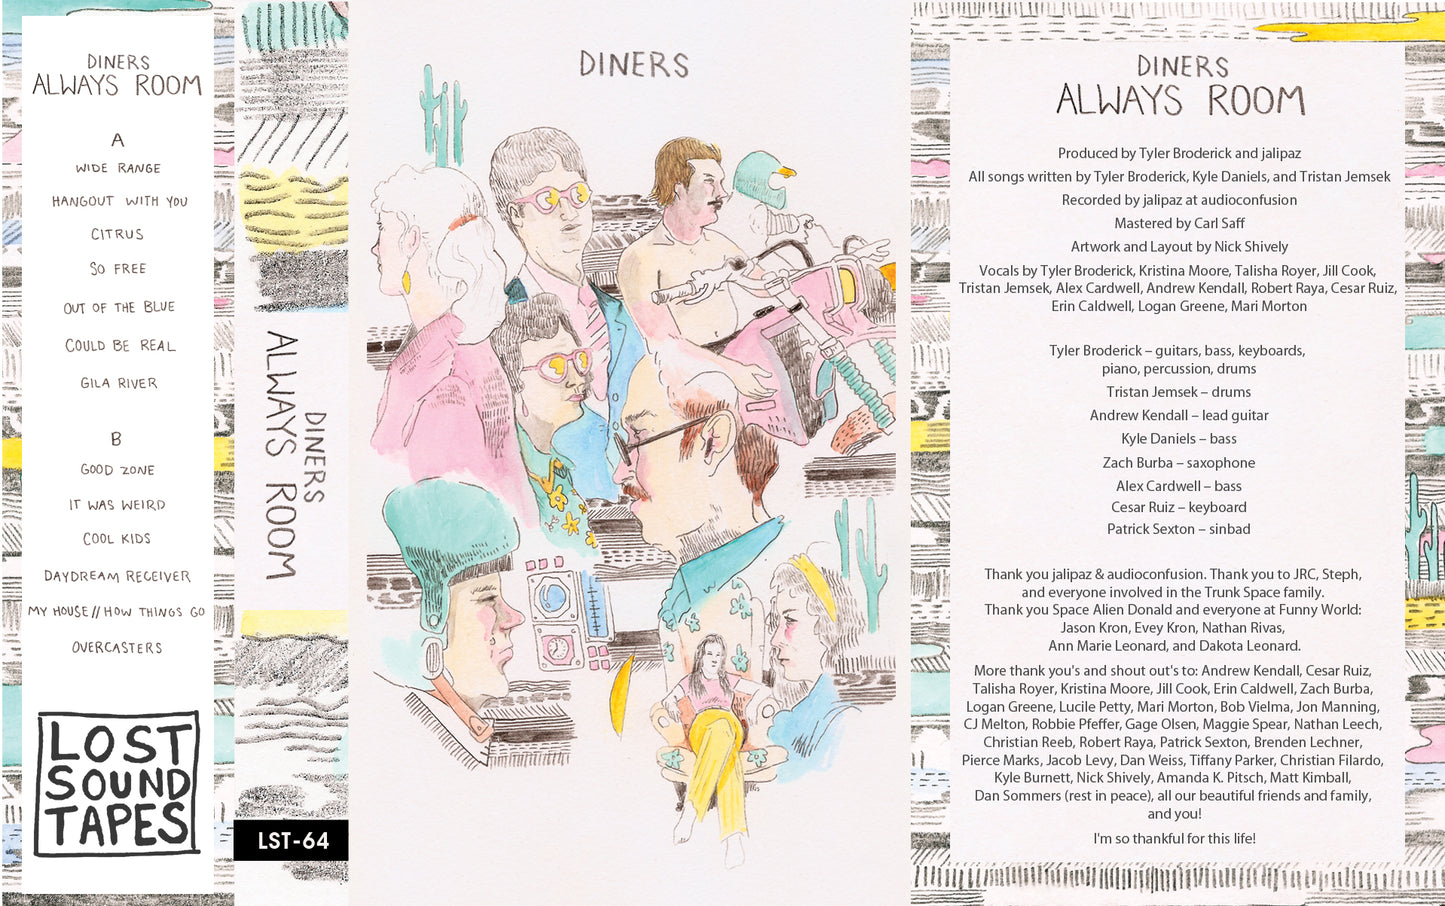 DINERS "Always Room" cassette tape